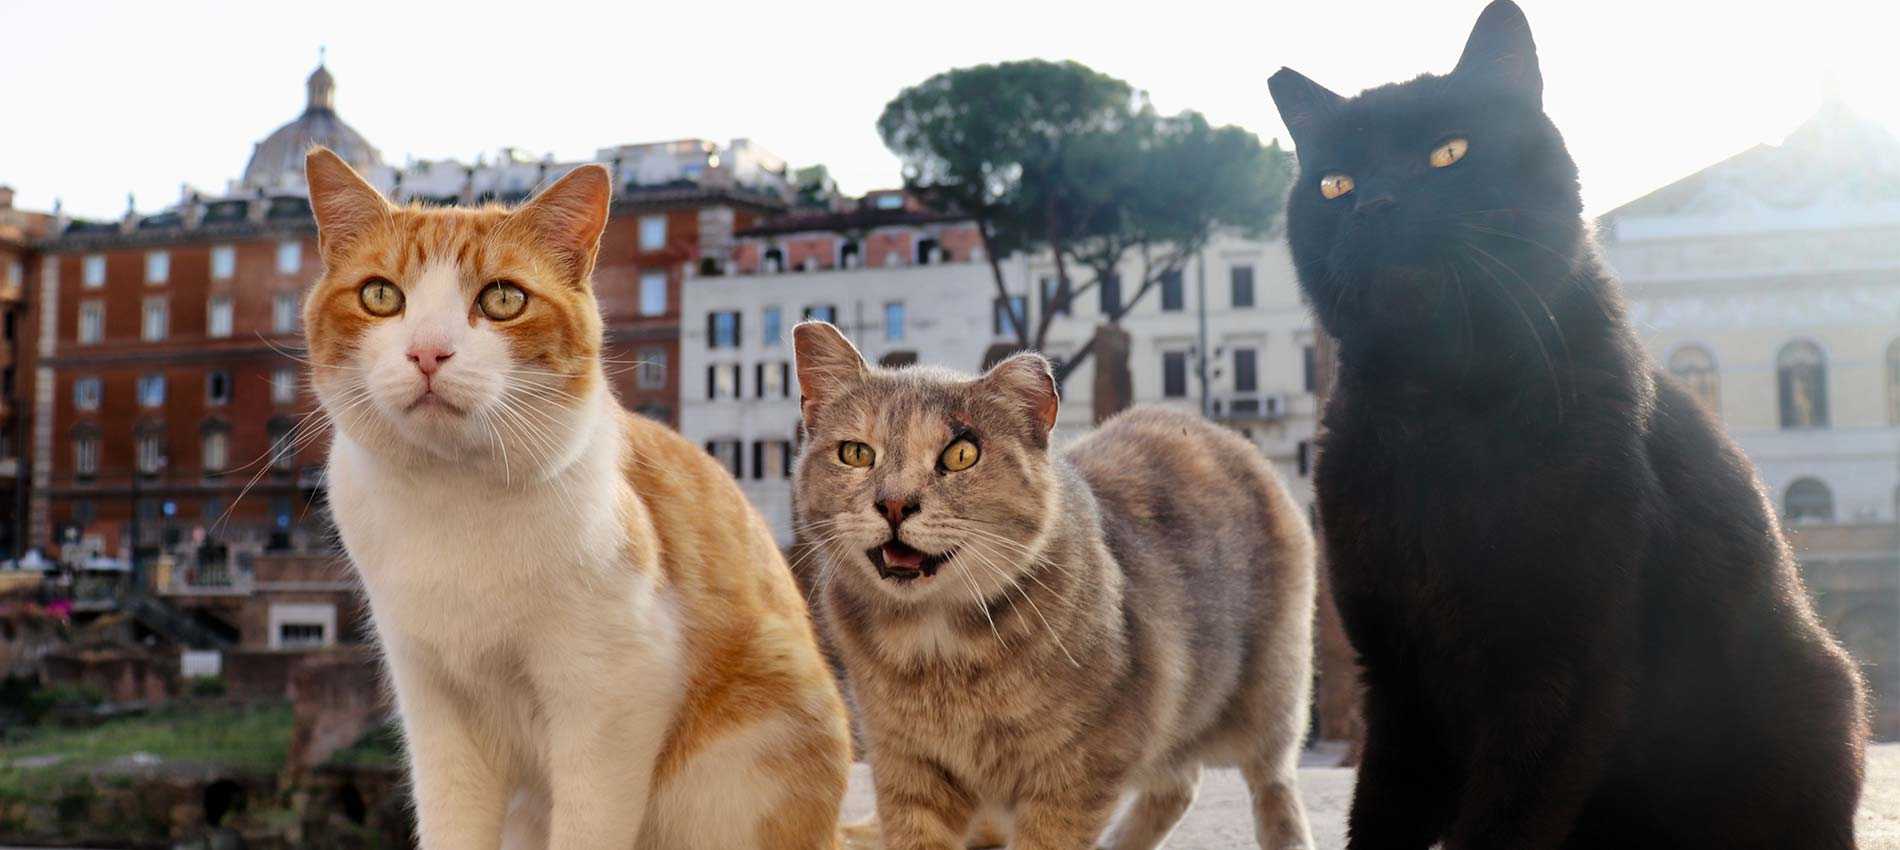 Roman Cats Torre Argentina Cat Santuary the oldest in Rome